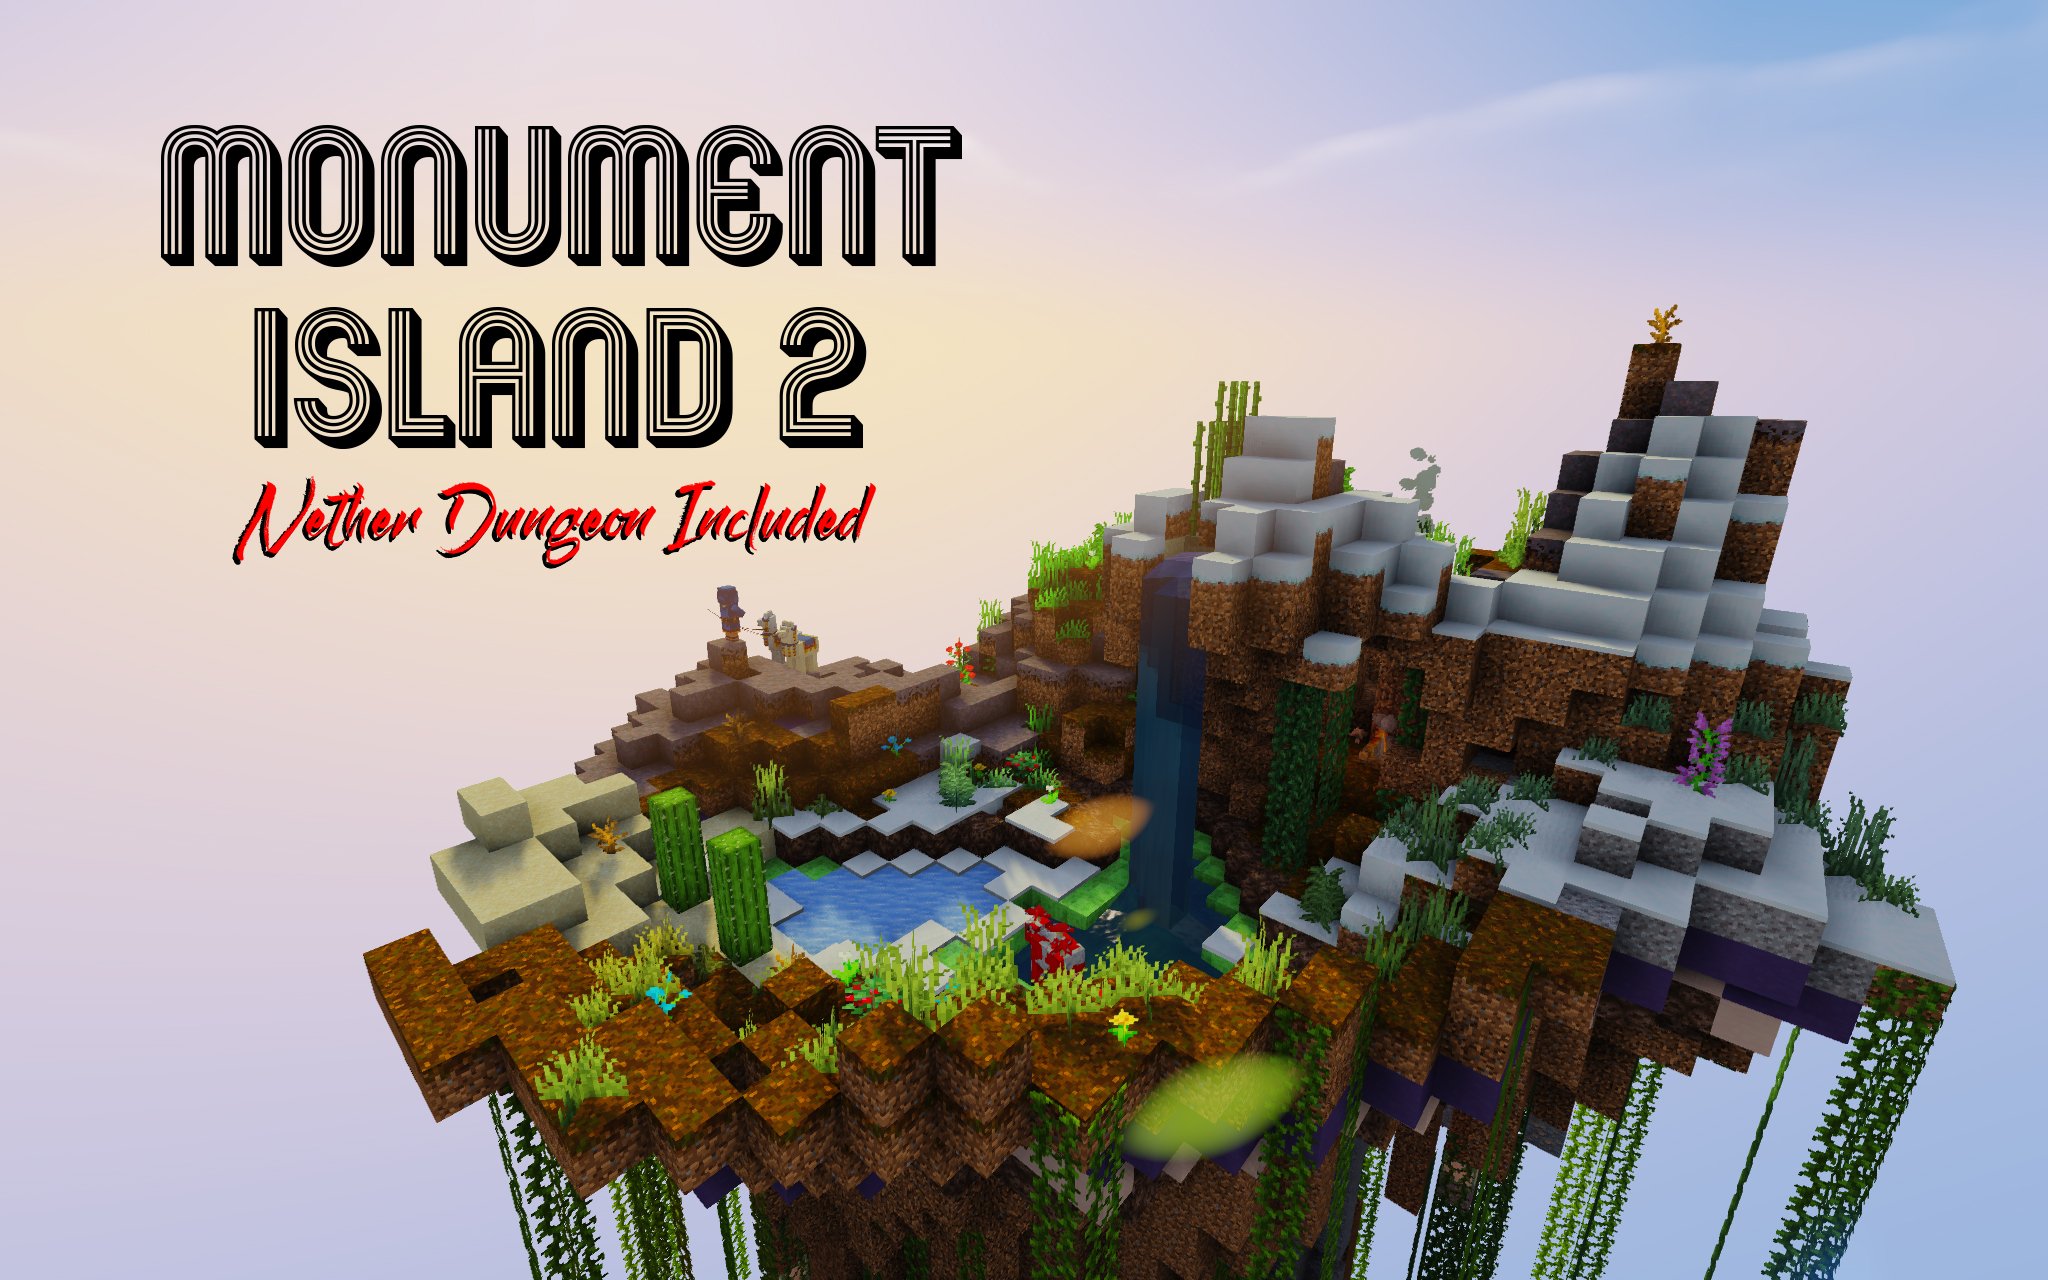 Download Monument Island 2 for Minecraft 1.15.2